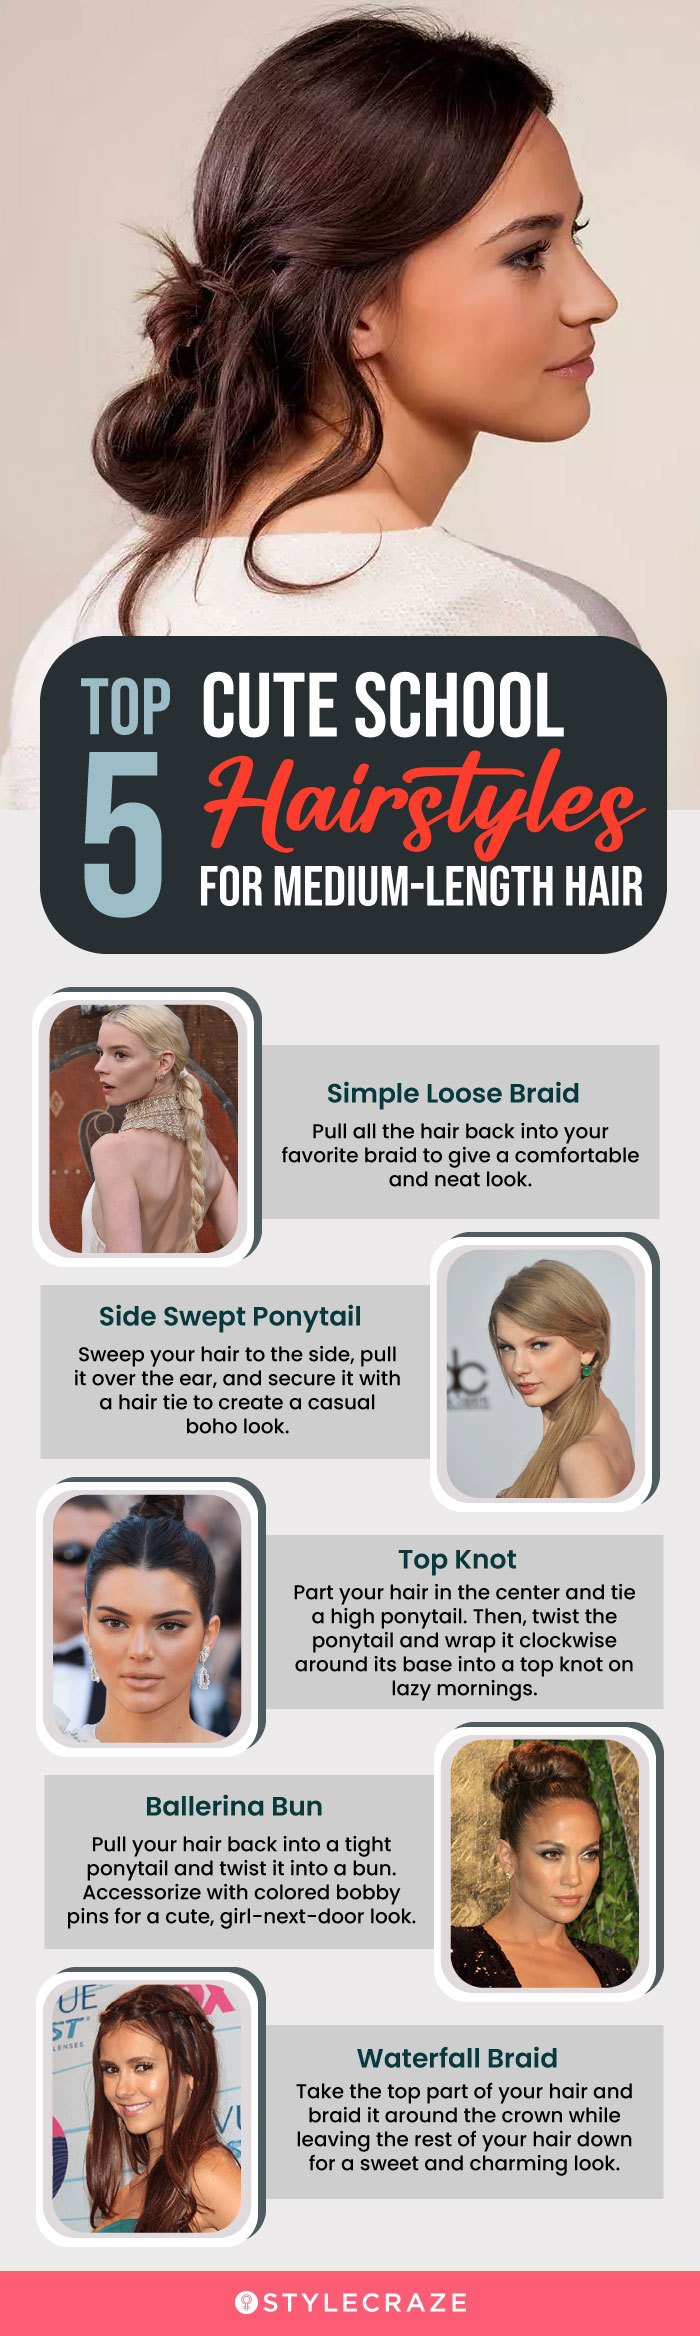 top 5 cute school hairstyles for medium length hair (infographic)